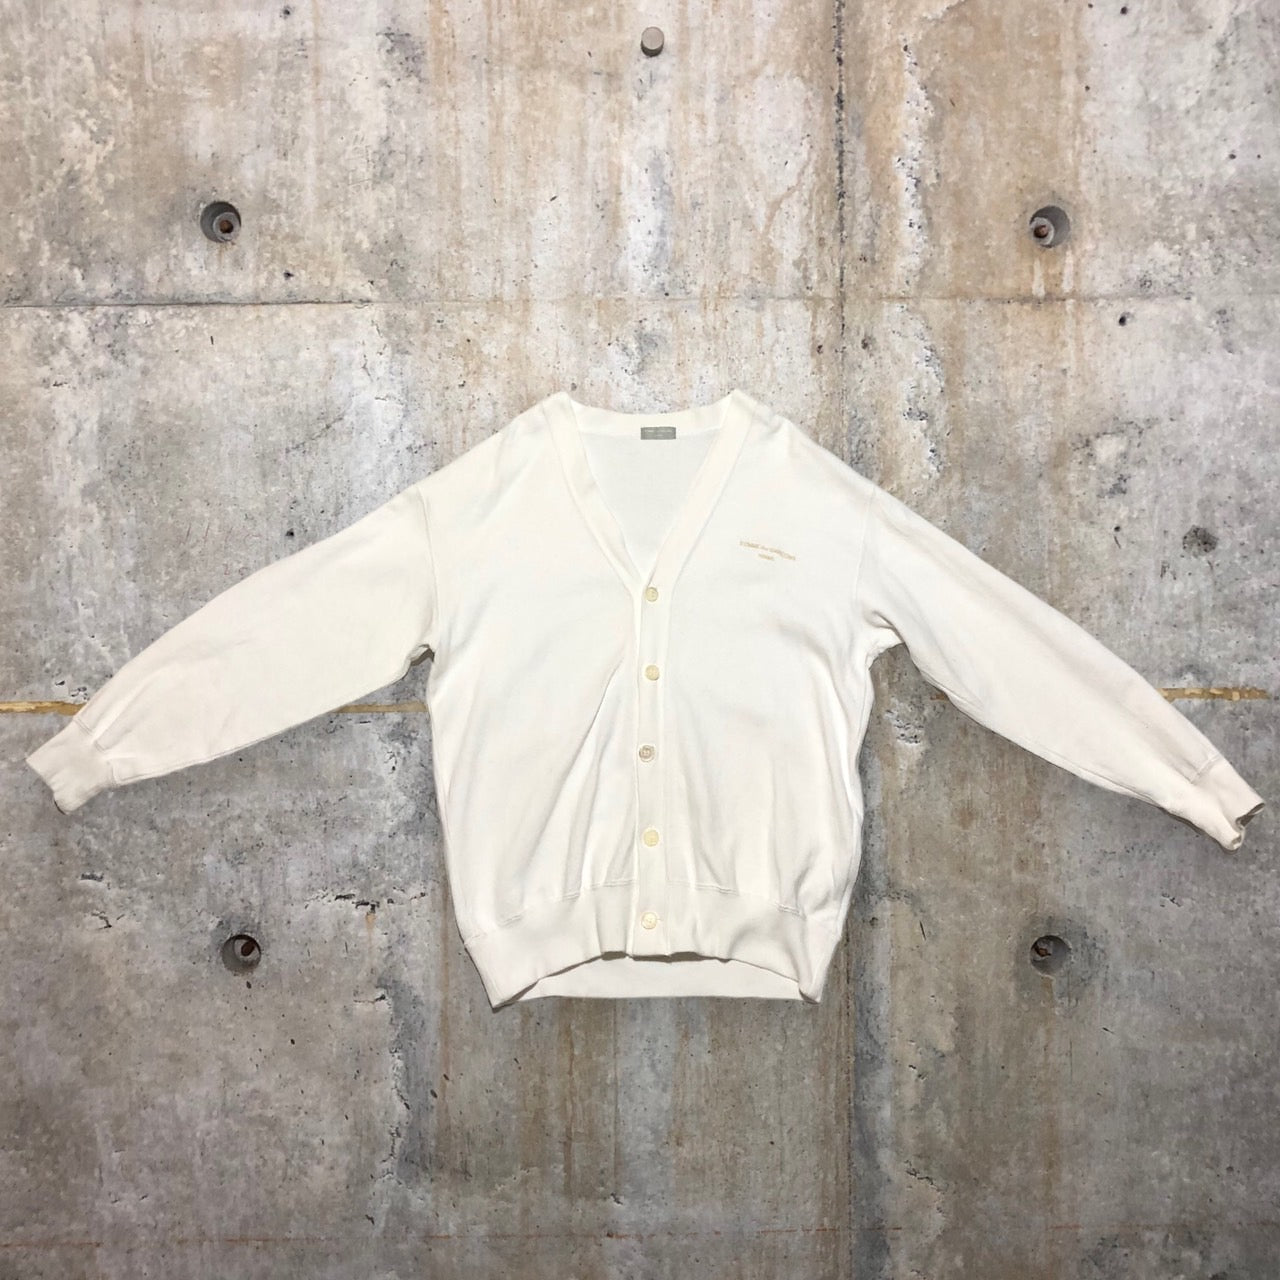 COMME des GARCONS HOMME(コムデギャルソンオム) 80's One-point logo embroidered cotton cardigan/ワンポイントロゴ刺繍コットンカーディガン/80年代/ヴィンテージ/川久保玲/本人期 HT-110030 SIZE FREE(M～L程度) ホワイト AD1989